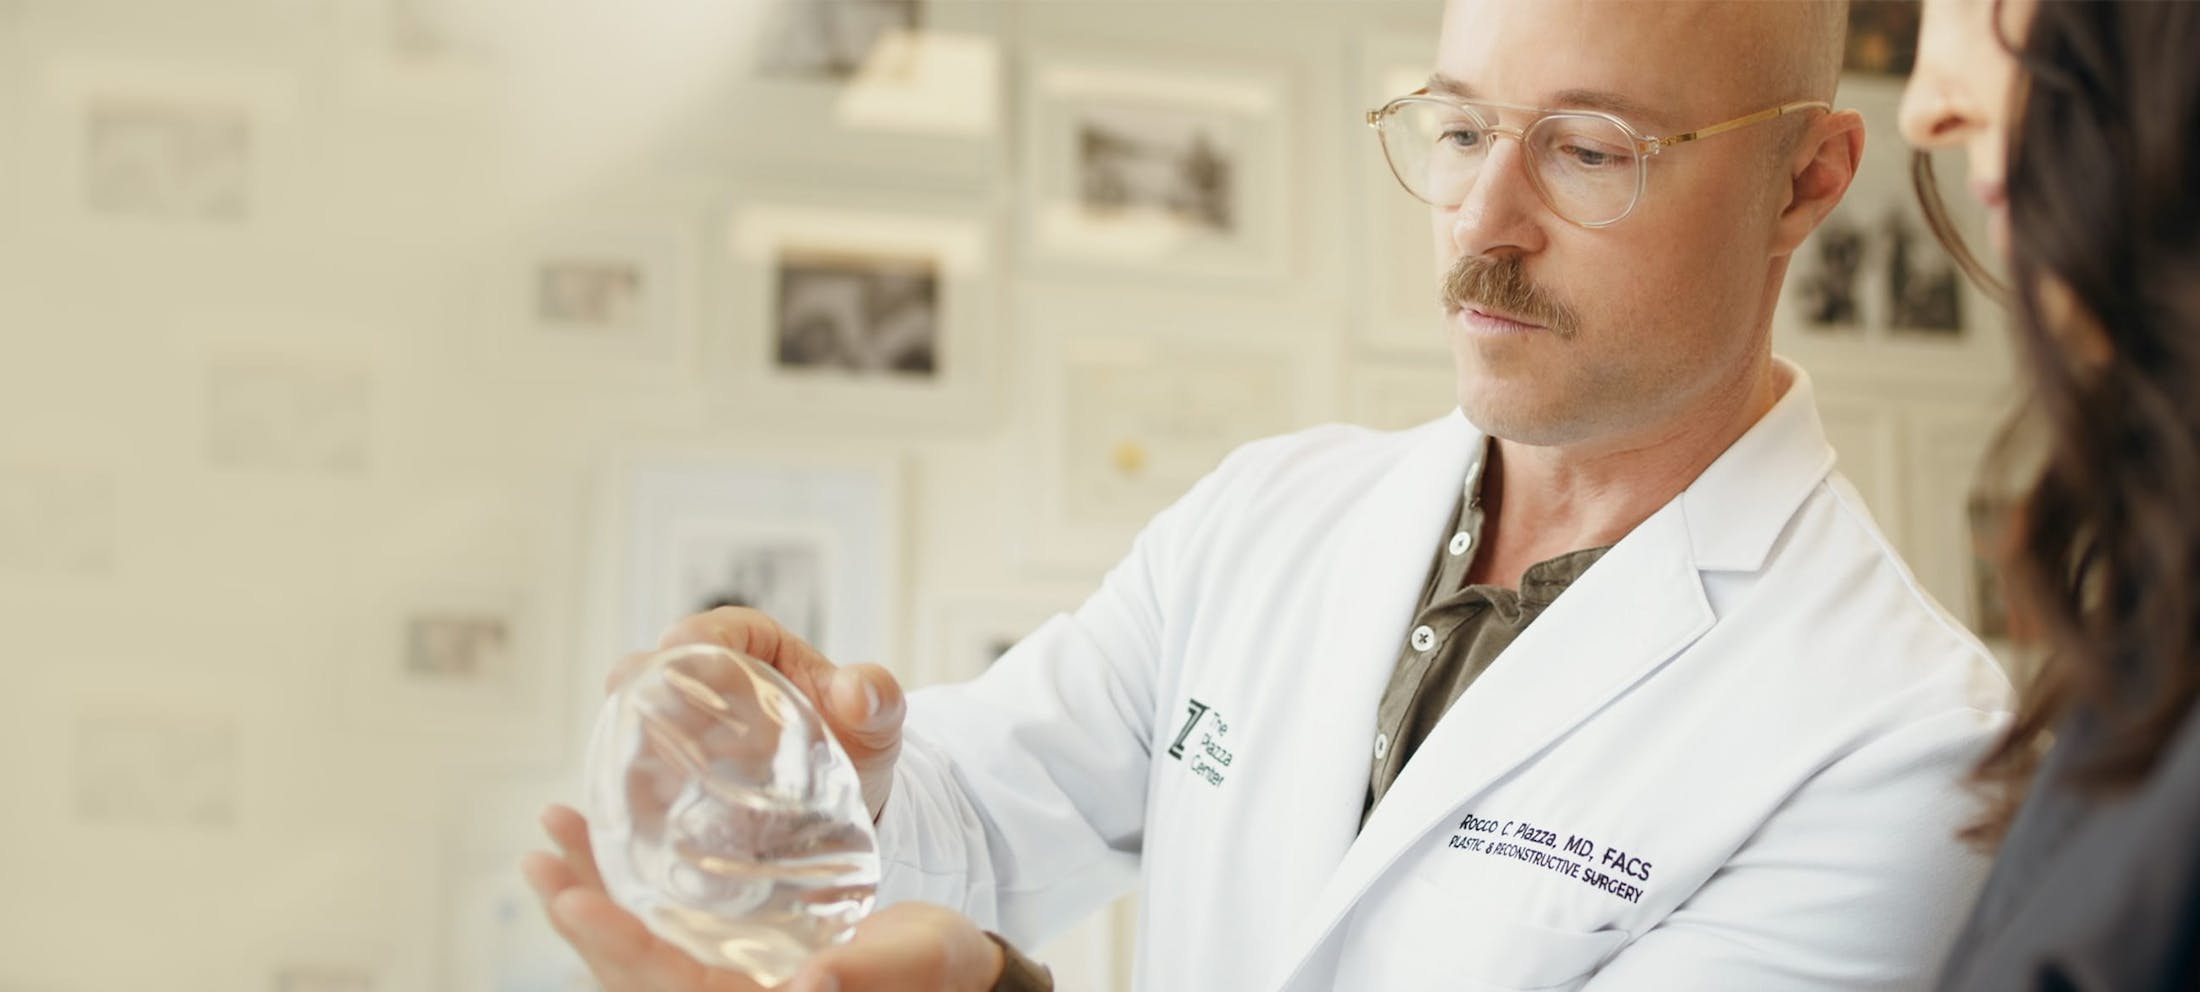 Dr. Piazza looking at a breast implant with a patient